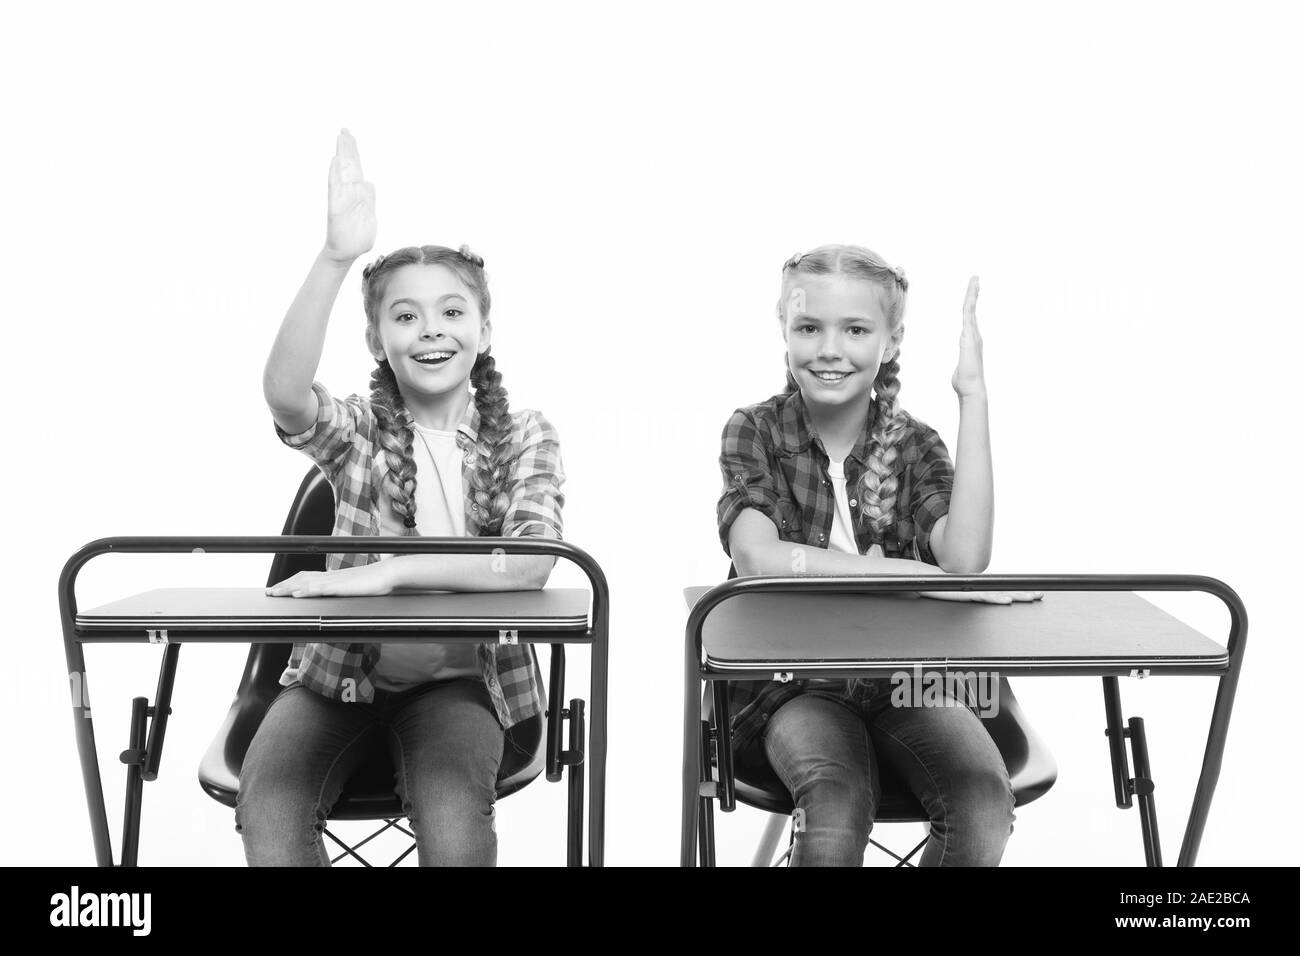 Free or private schooling. Little children enjoy home schooling. Small schoolgirls having compulsory schooling. Adorable kids with raised hands sitting at desks isolated on white. Schooling years. Stock Photo